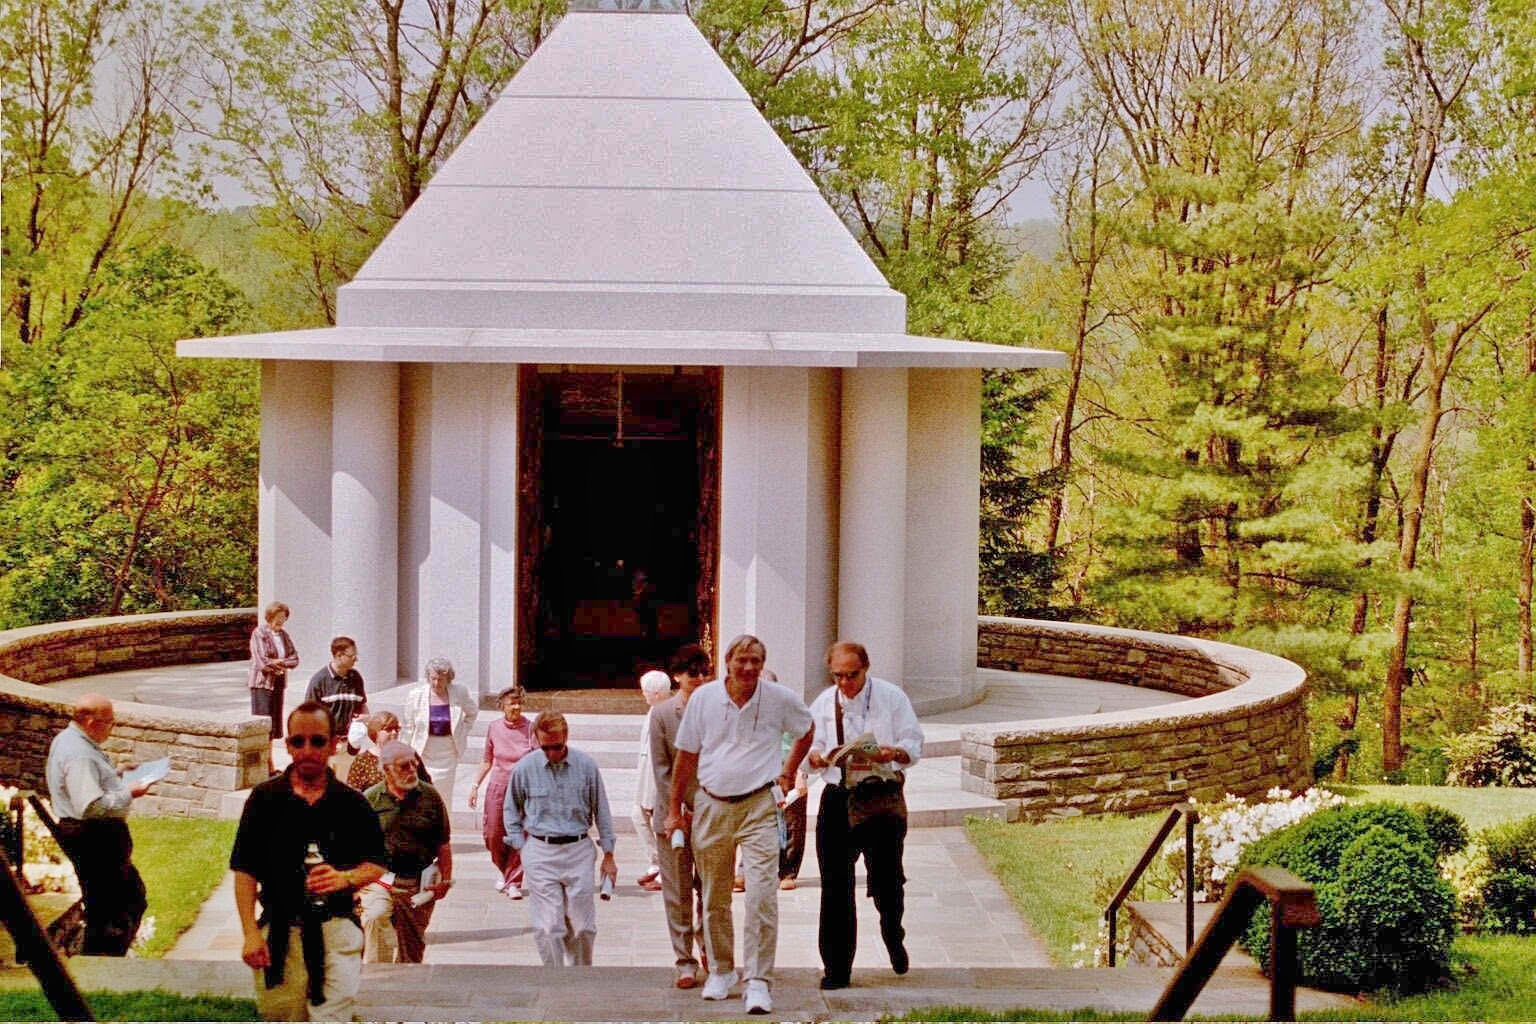 The Shrine to Life atThe Mount of the House of the Lord.